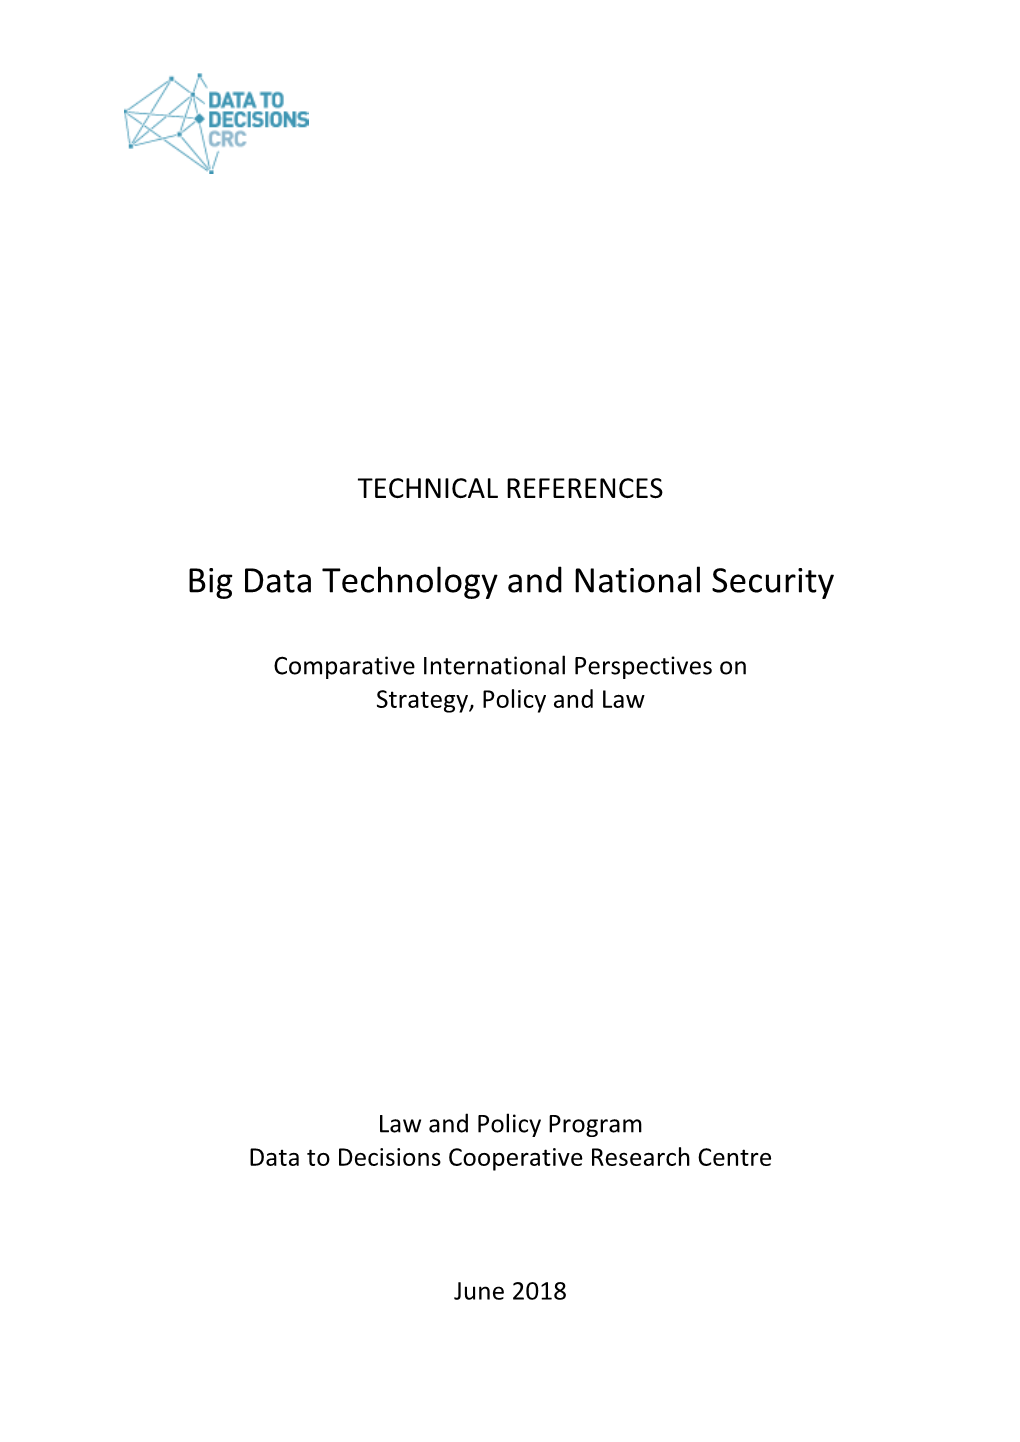 Big Data Technology and National Security